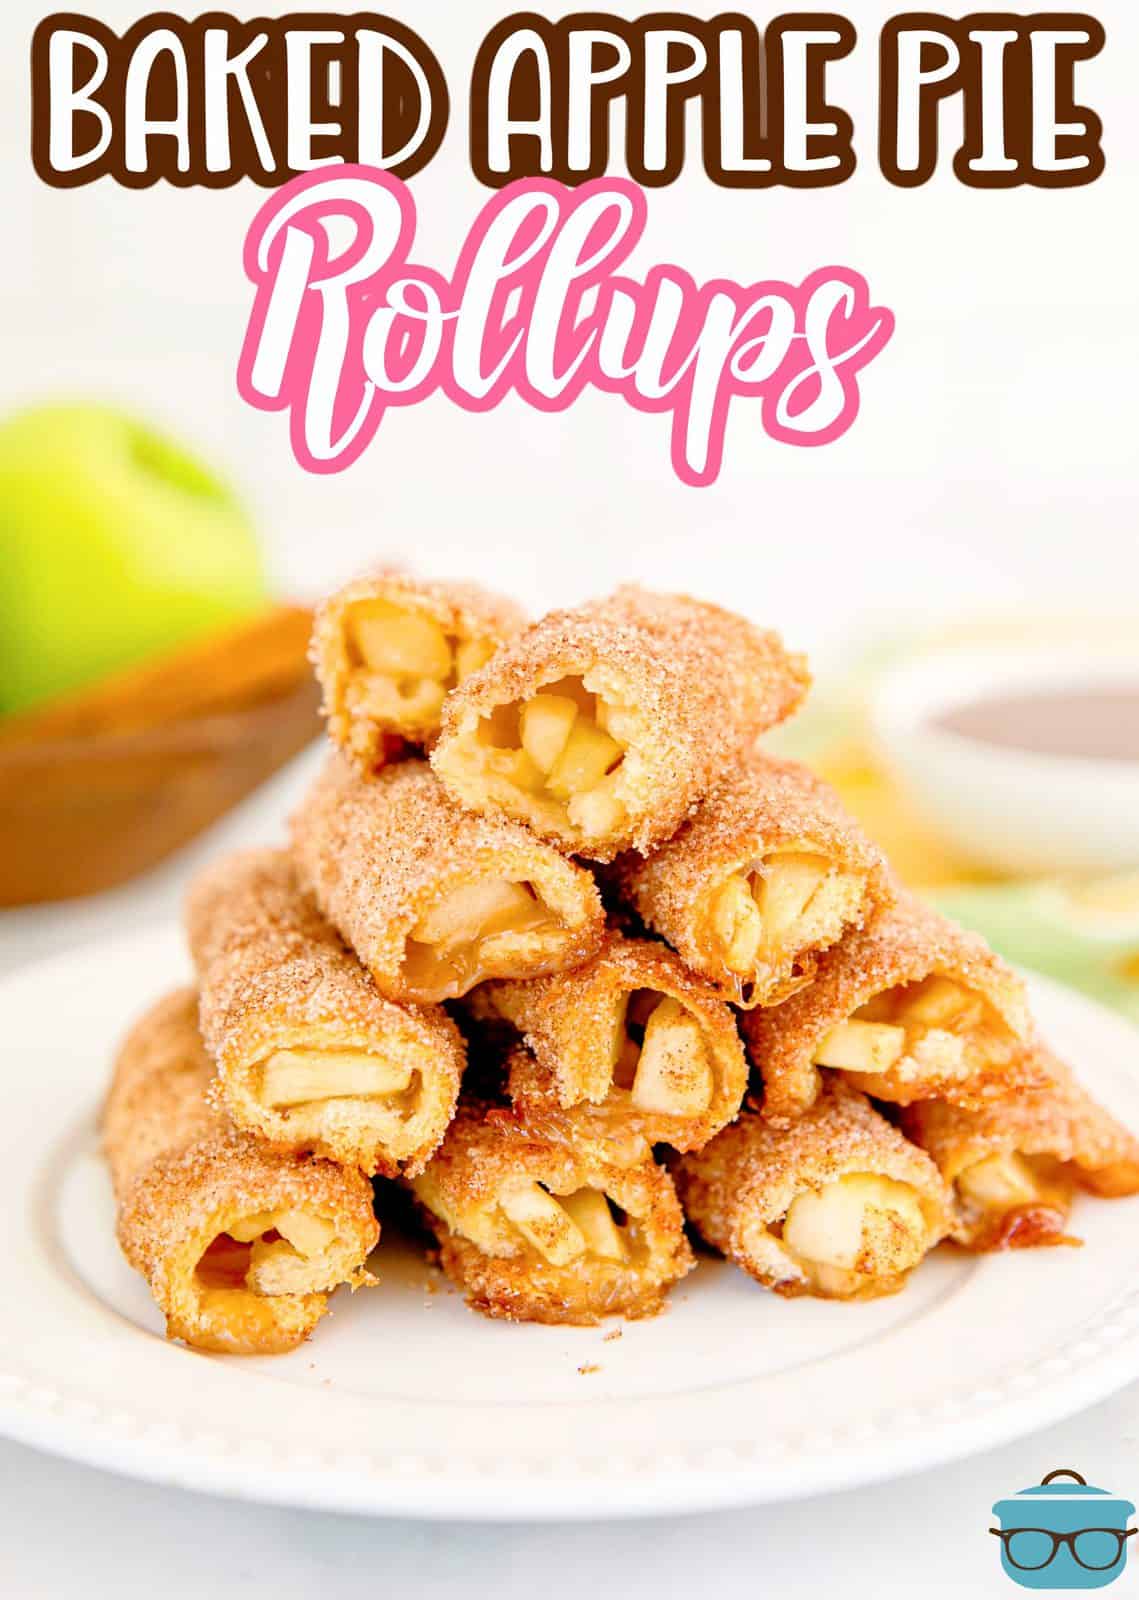 Stacked Pinterest image of Baked Apple Pie Rollups on white plate.